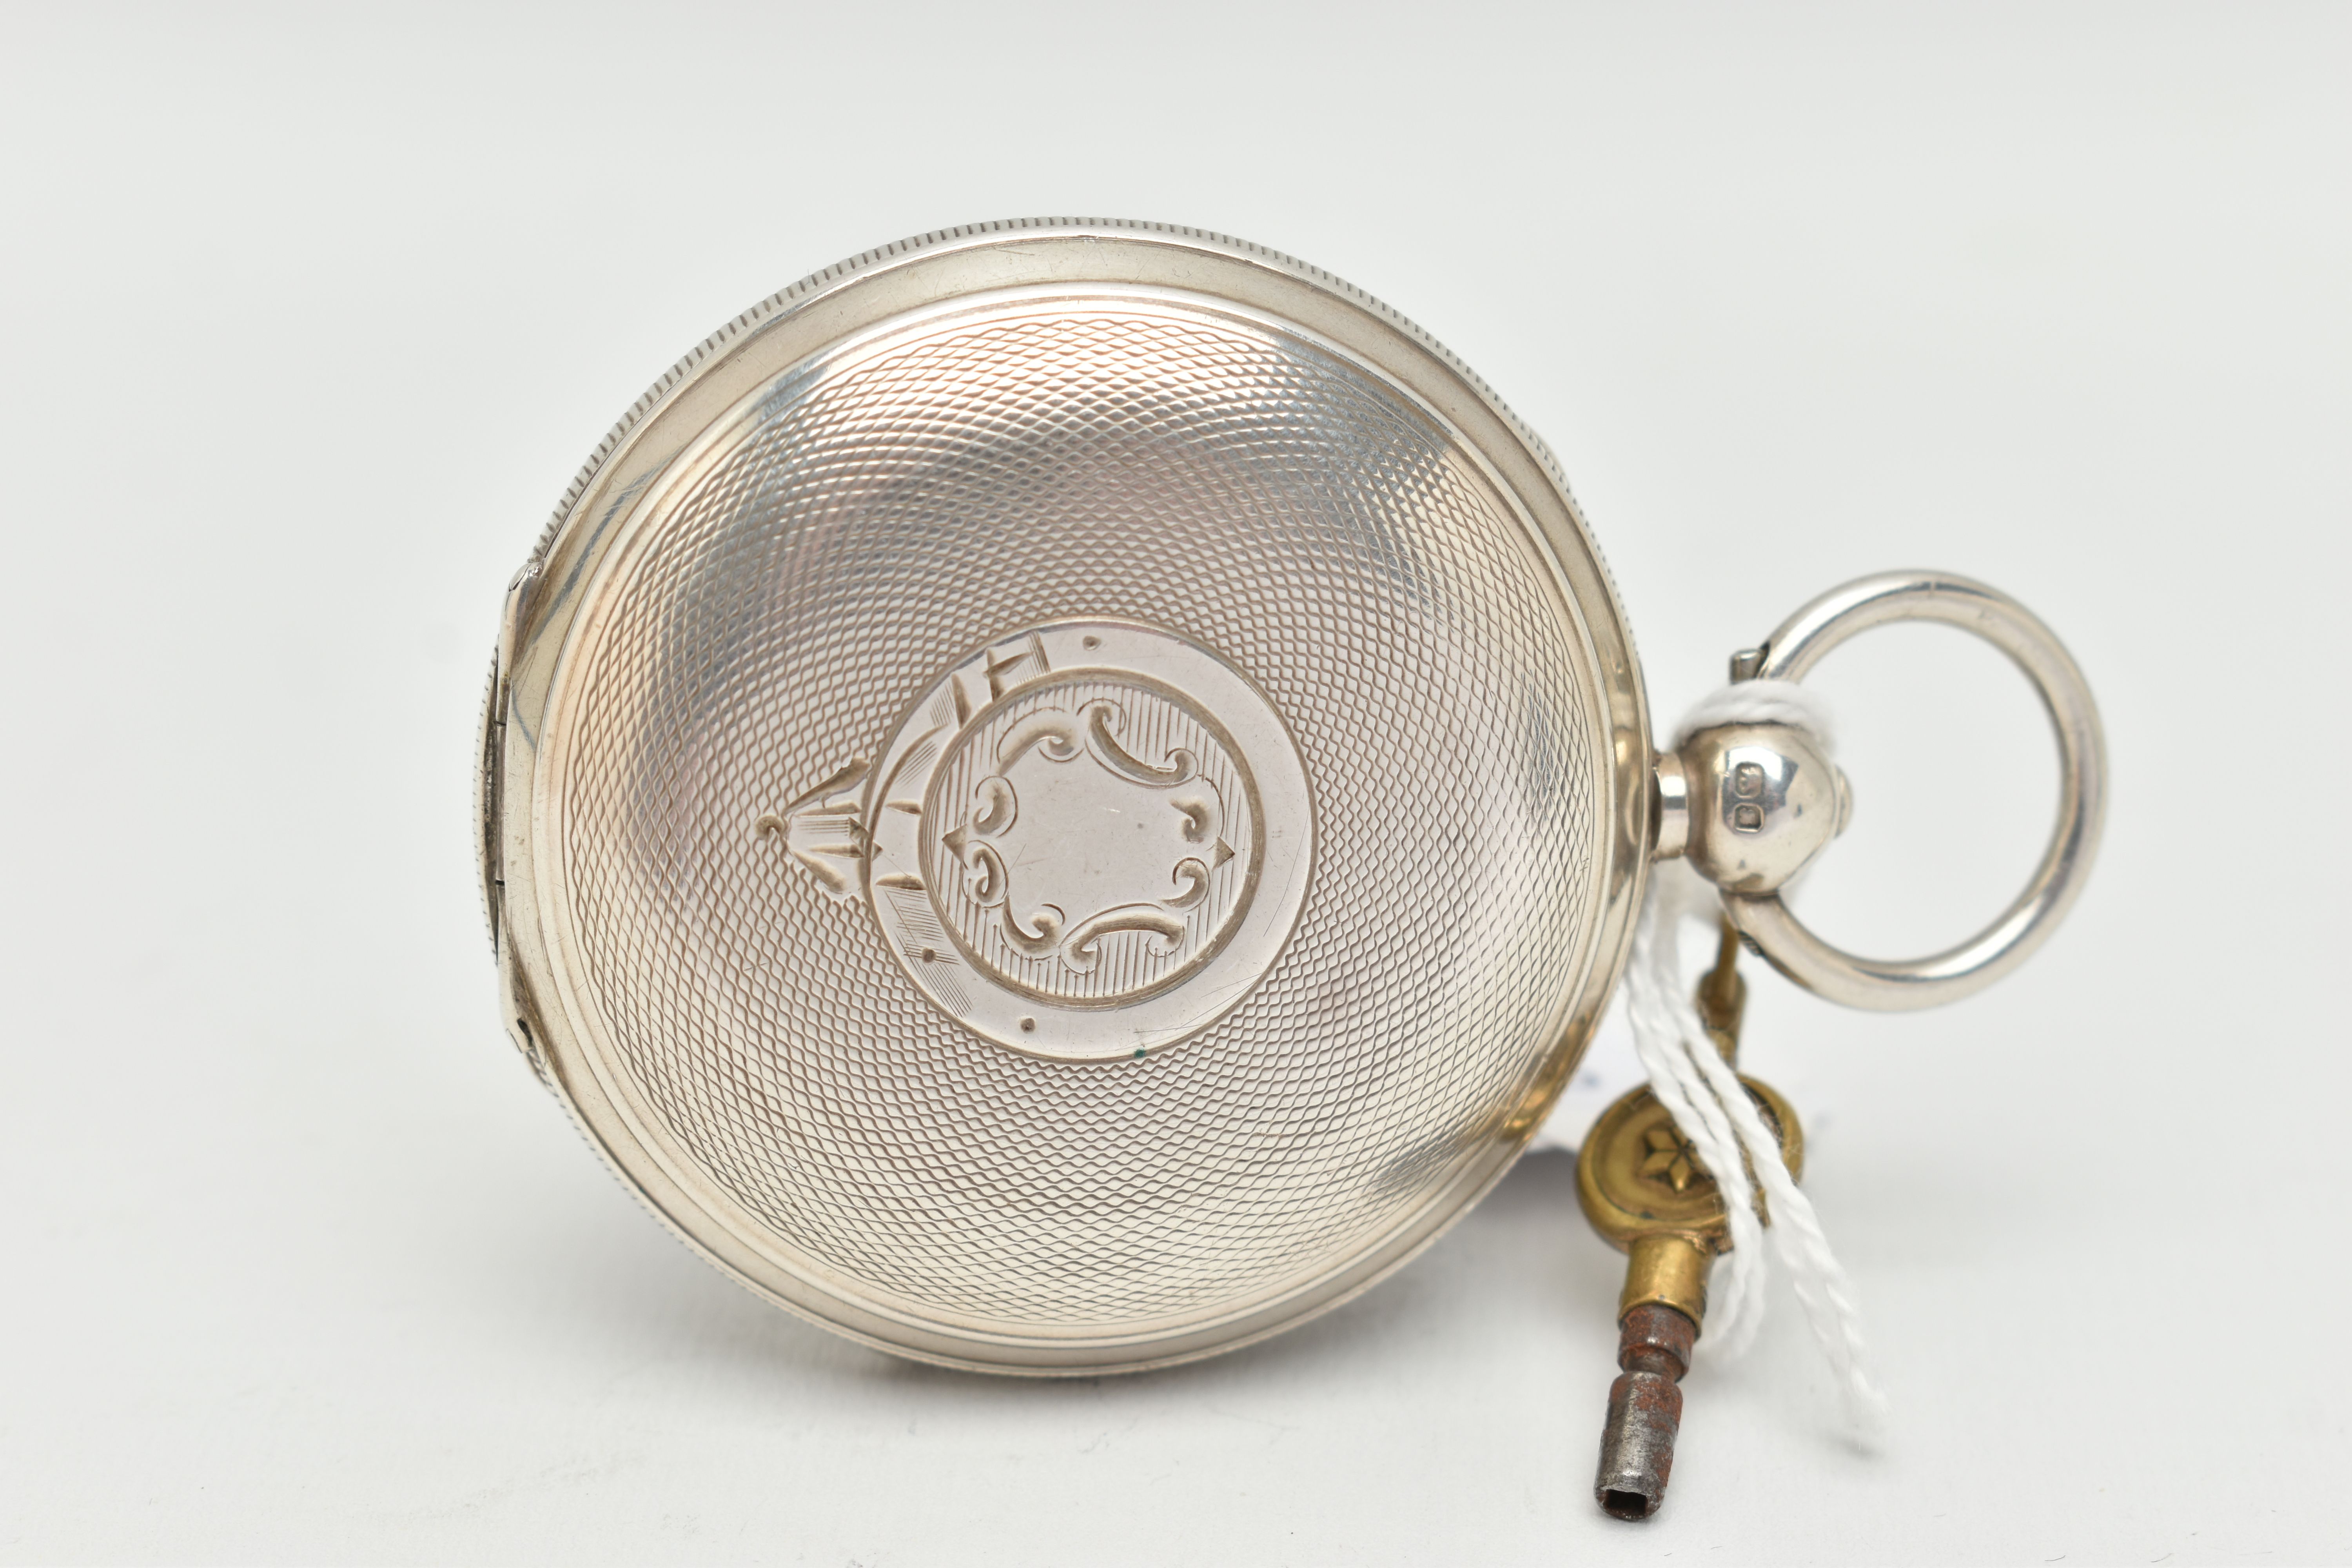 AN EDWARDIAN SILVER FULL HUNTER POCKET WATCH, key wound movement, Roman numerals, second - Image 2 of 6